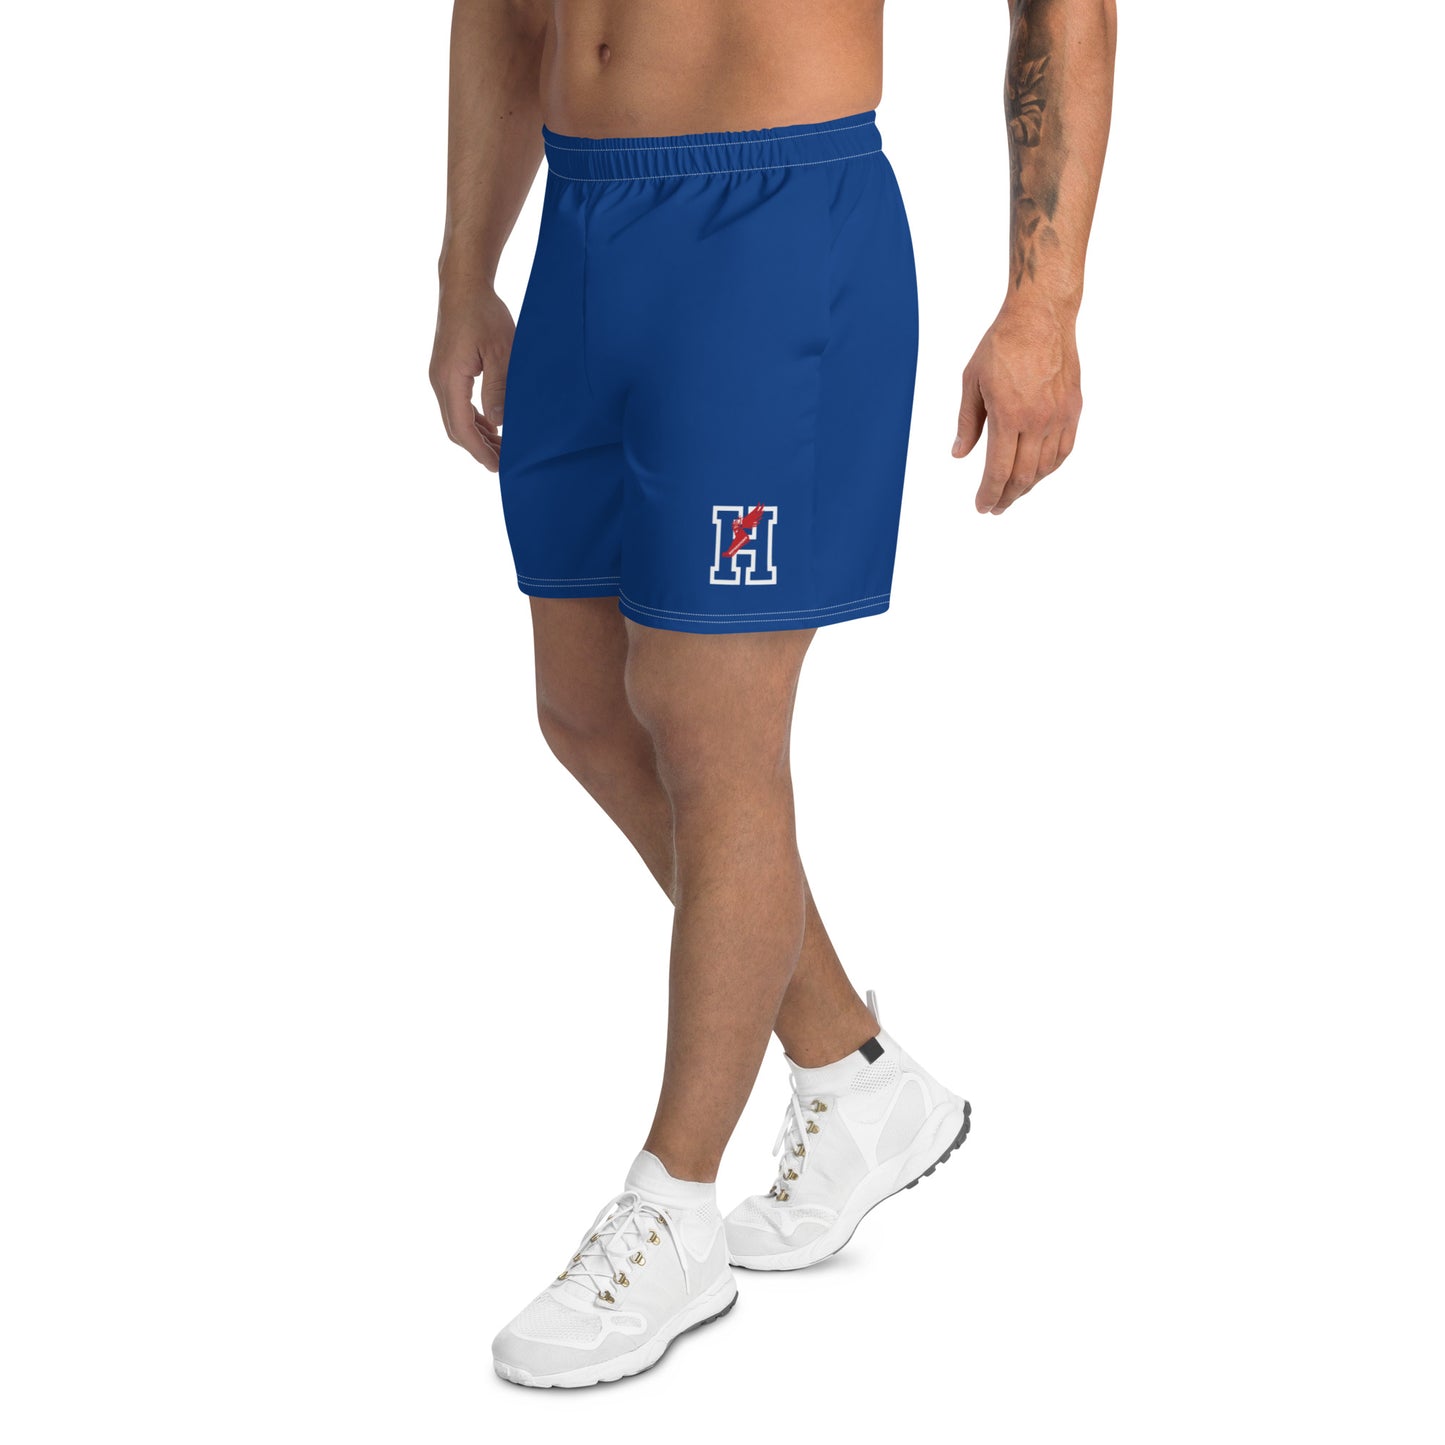 Reparations Track Club Blue Shorts (Home of the Brave edition)